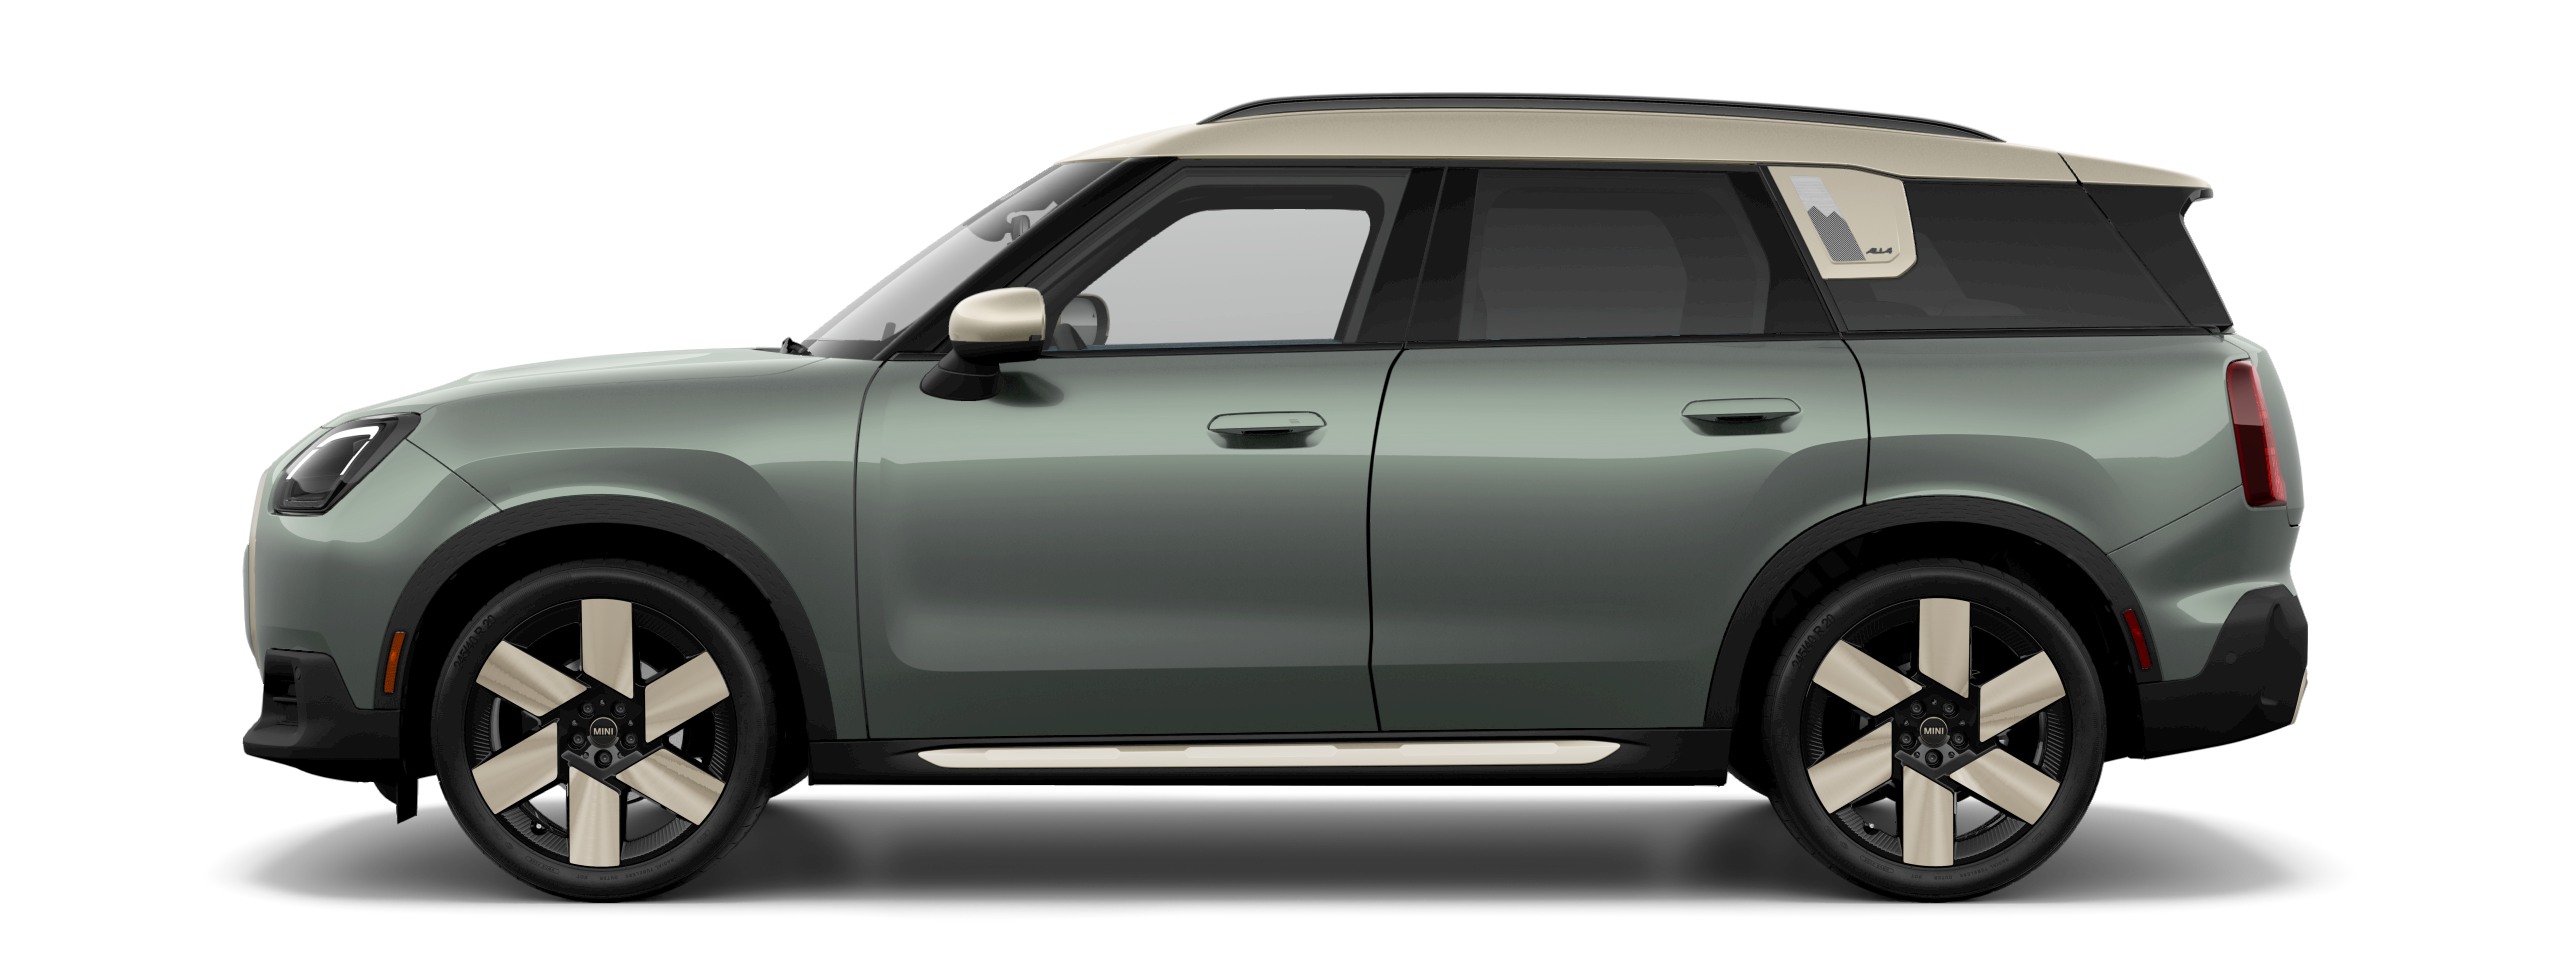 Side view of a 2025 MINI Countryman SE ALL4 in the Smokey Green body color, facing left with its shadow underneath it.